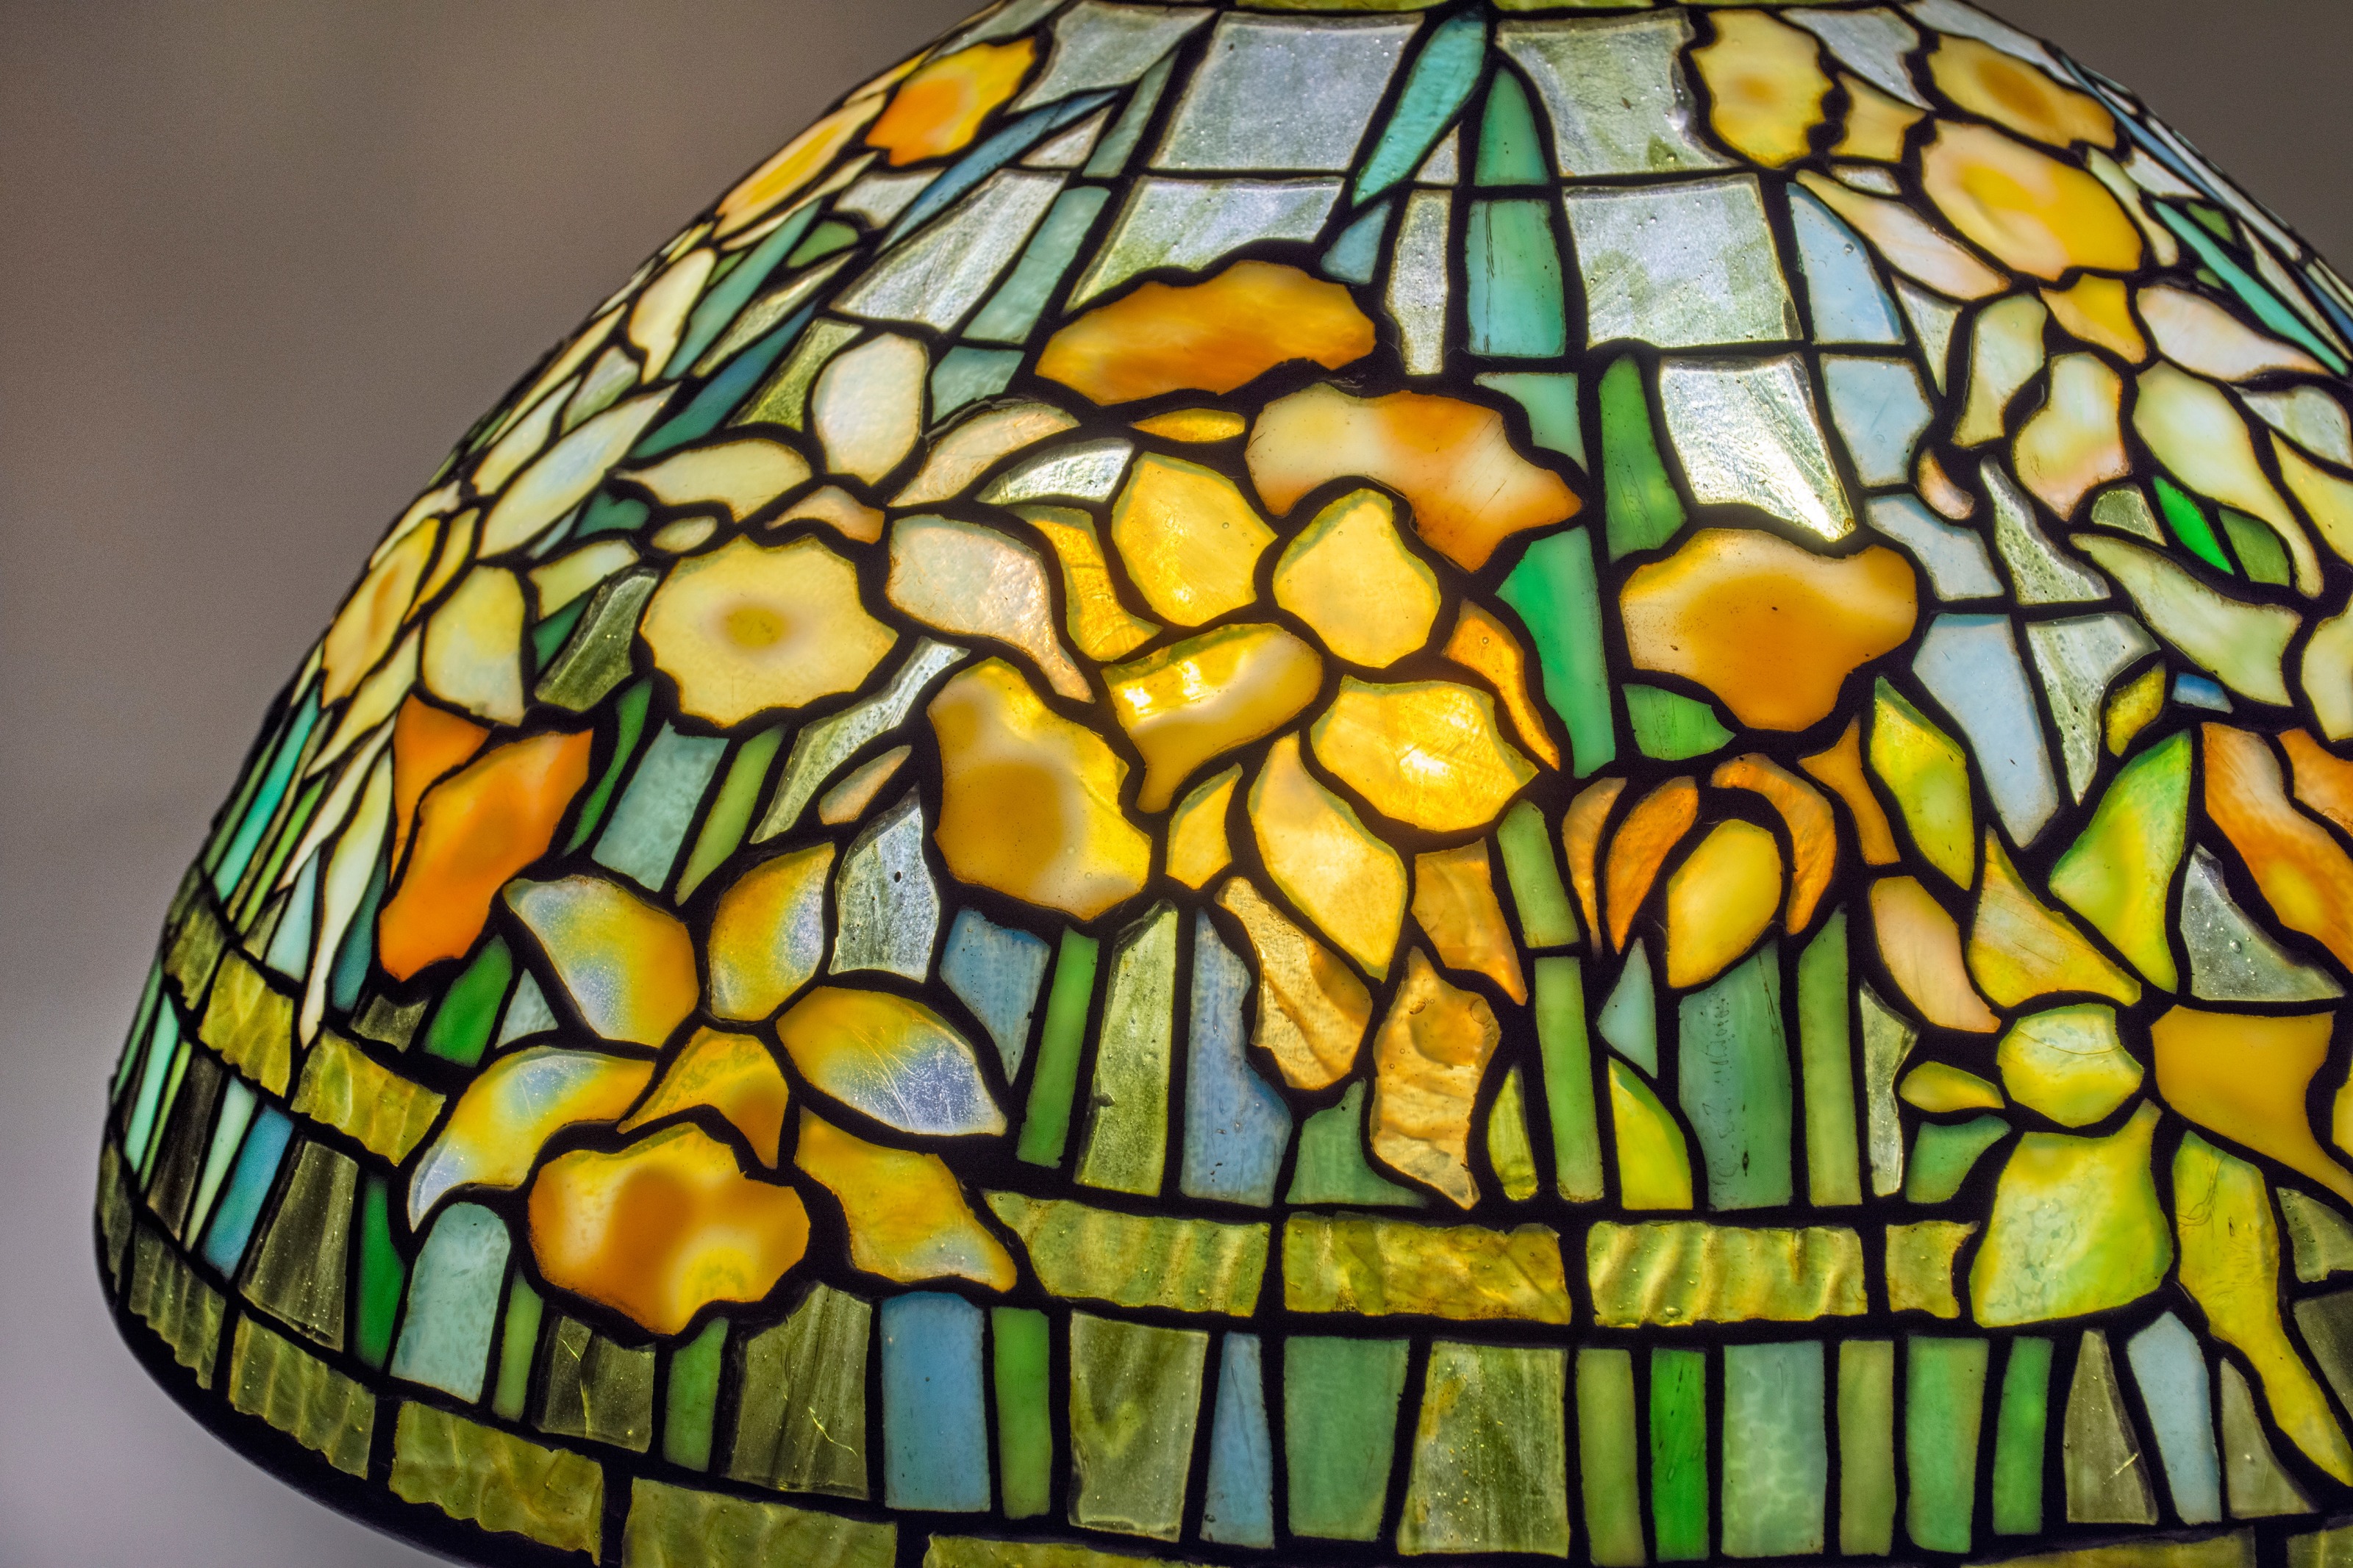 close up of a leaded glass tiffany studios lamp shade showing yellow daffodils in mottled glass, with spiky greenish blue leaves, against a background of translucent glass &quot;sky&quot;